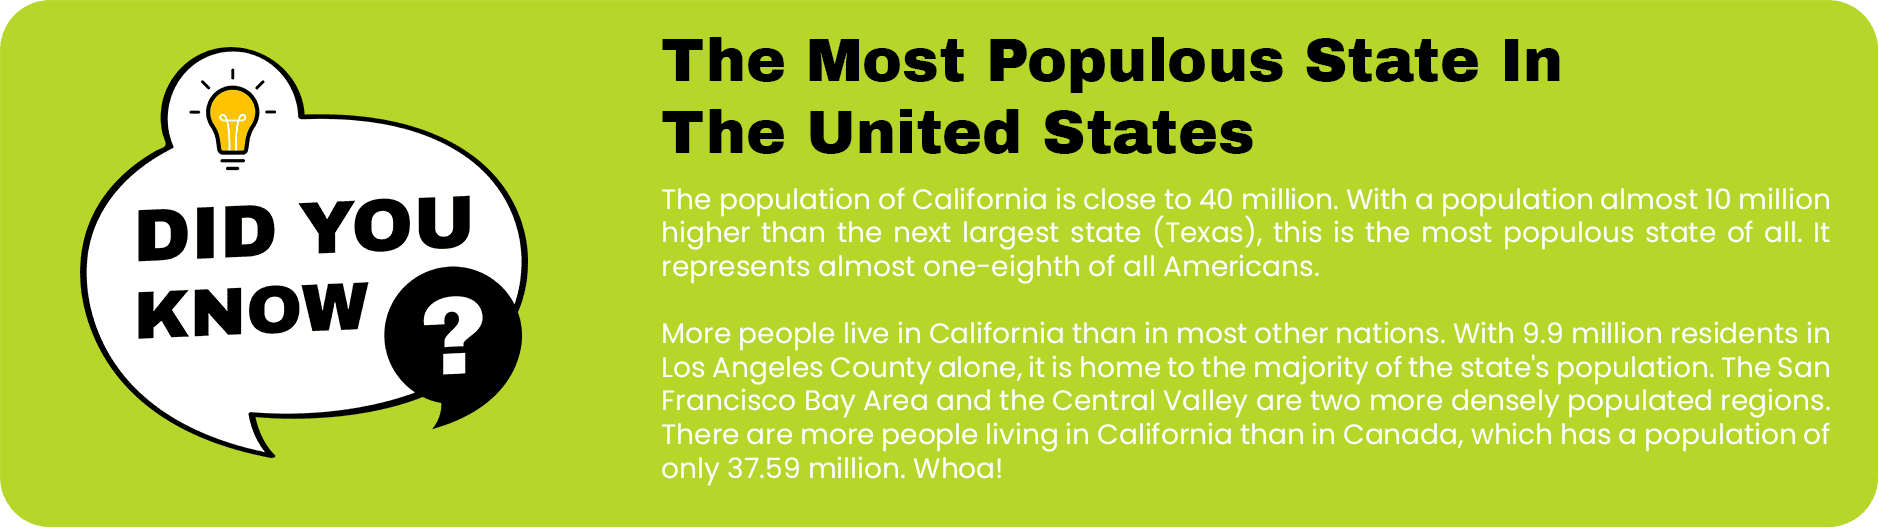 Informational graphic highlighting California as the preferred, most populous state in the United States with population details and comparisons.